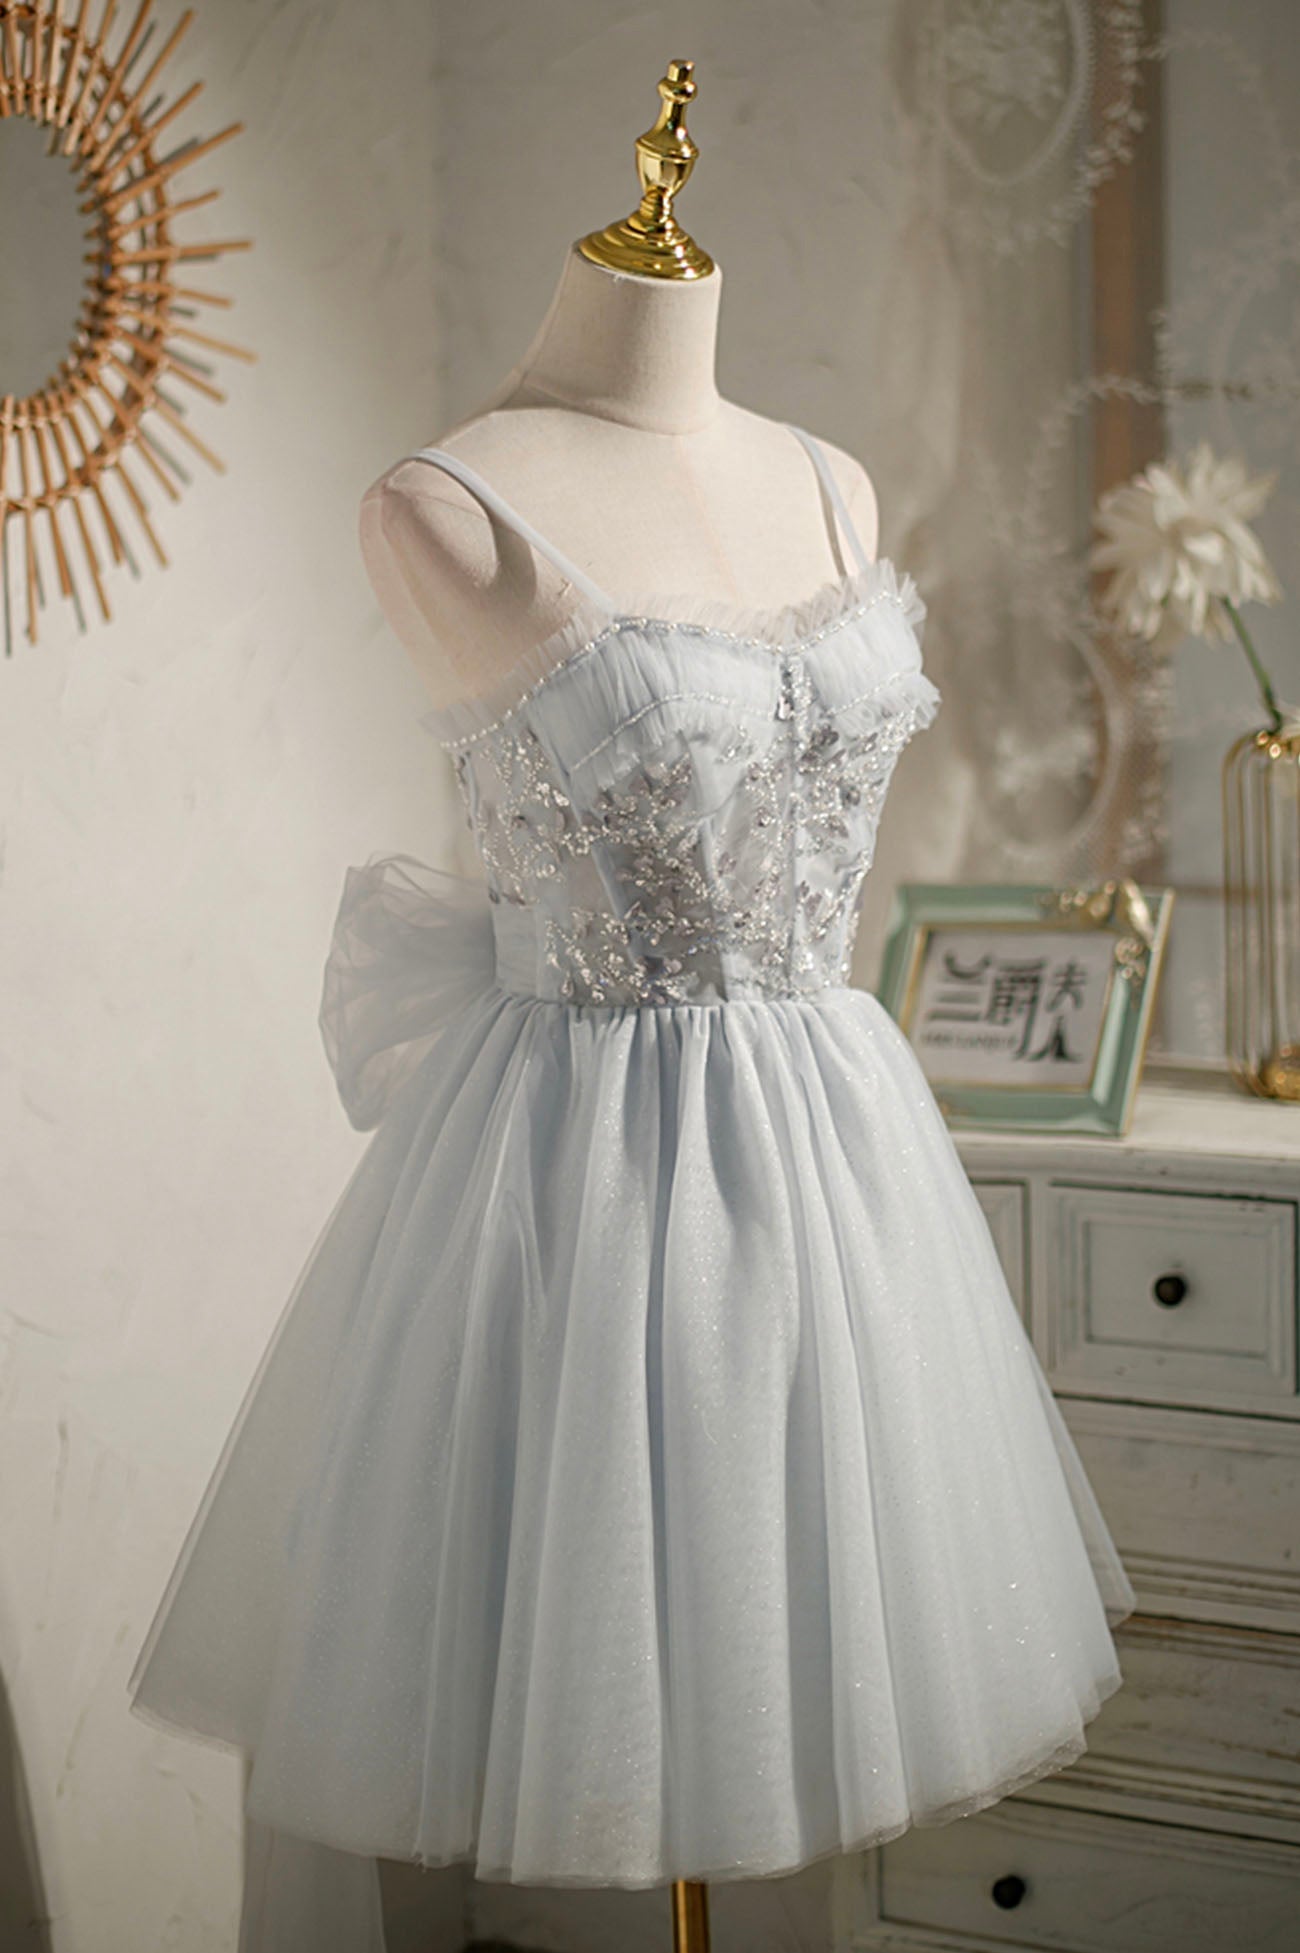 Gray Tulle Short A-Line Prom Dress, Cute Evening Party Dress